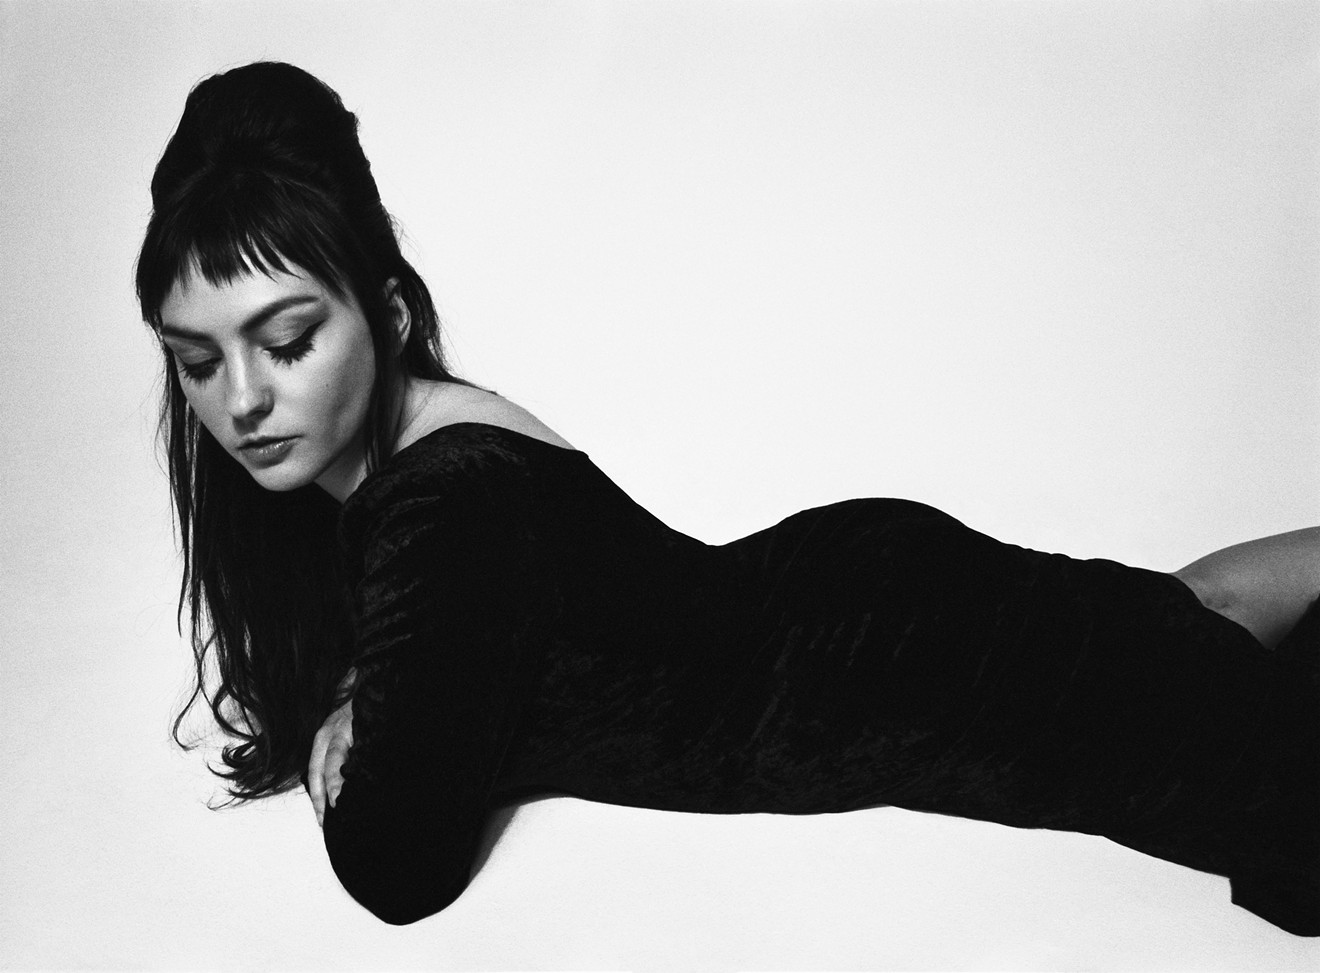 Angel Olsen plays the Gothic Theatre on December 14 and 15.